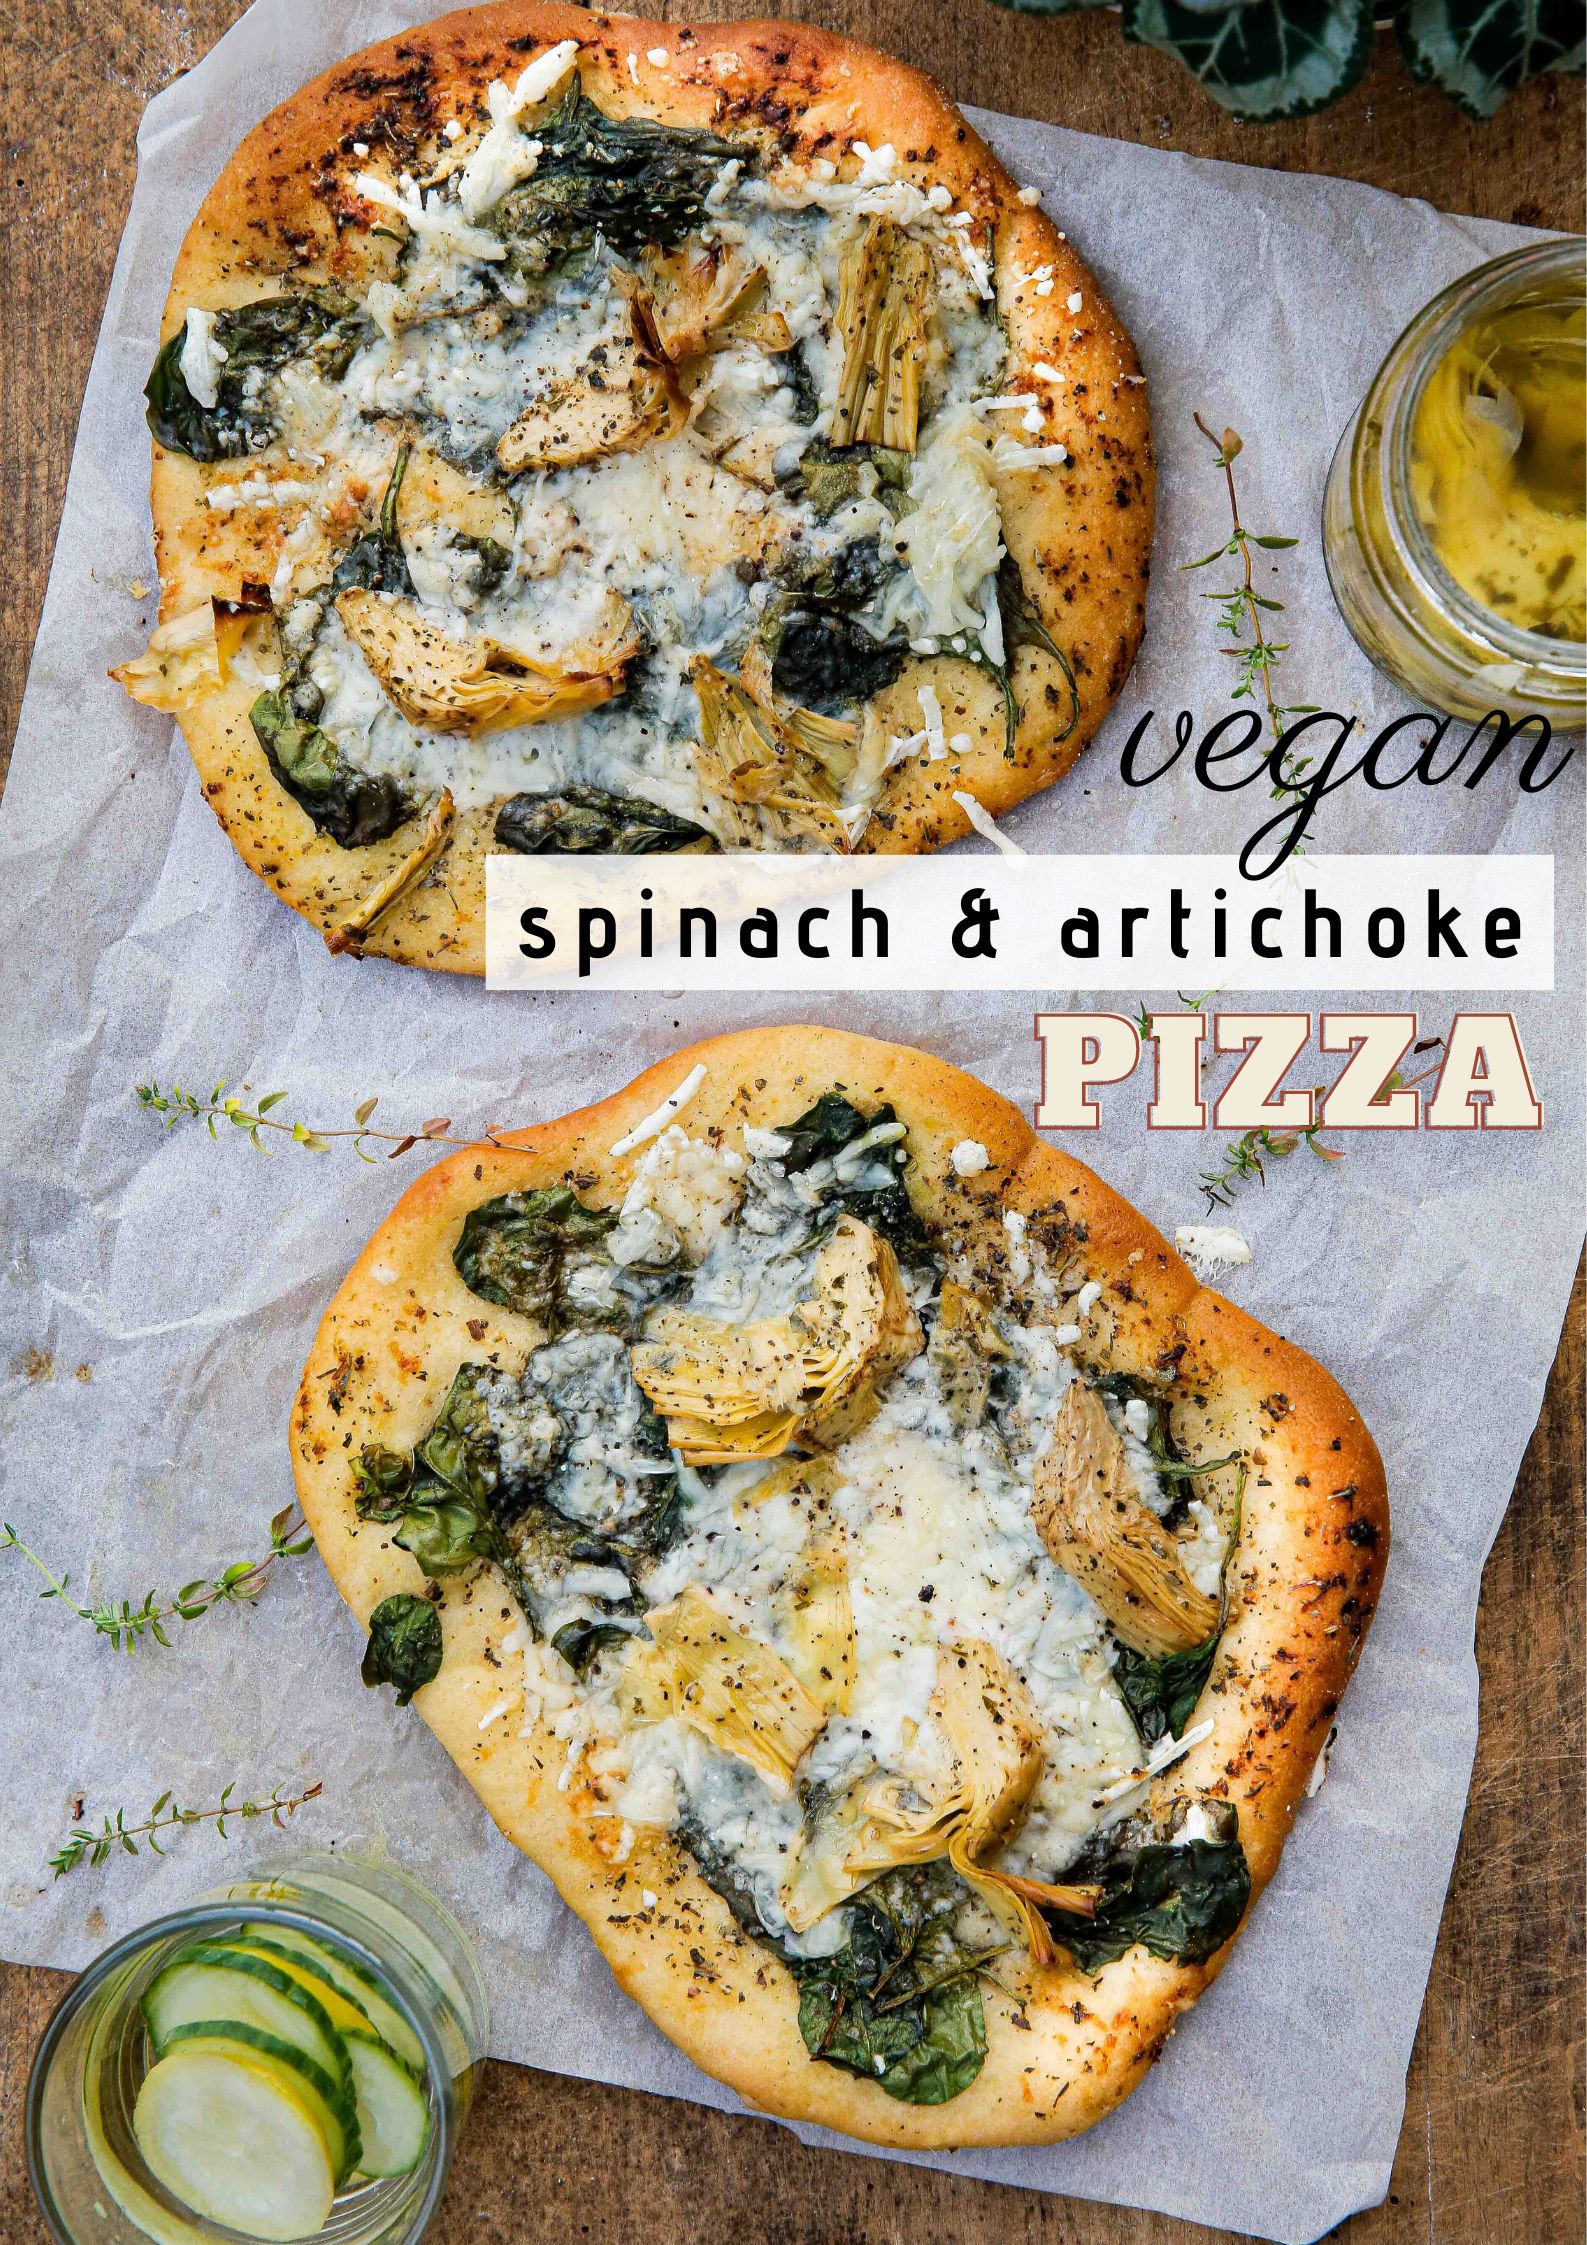 Garlicky, herby and cheesy this vegan spinach and artichoke pizza is so easy to make, so much cheaper than takeaway and beyond delicious! Recipe on thecookandhim.com #veganpizza #pizzarecipe #homemadepizza